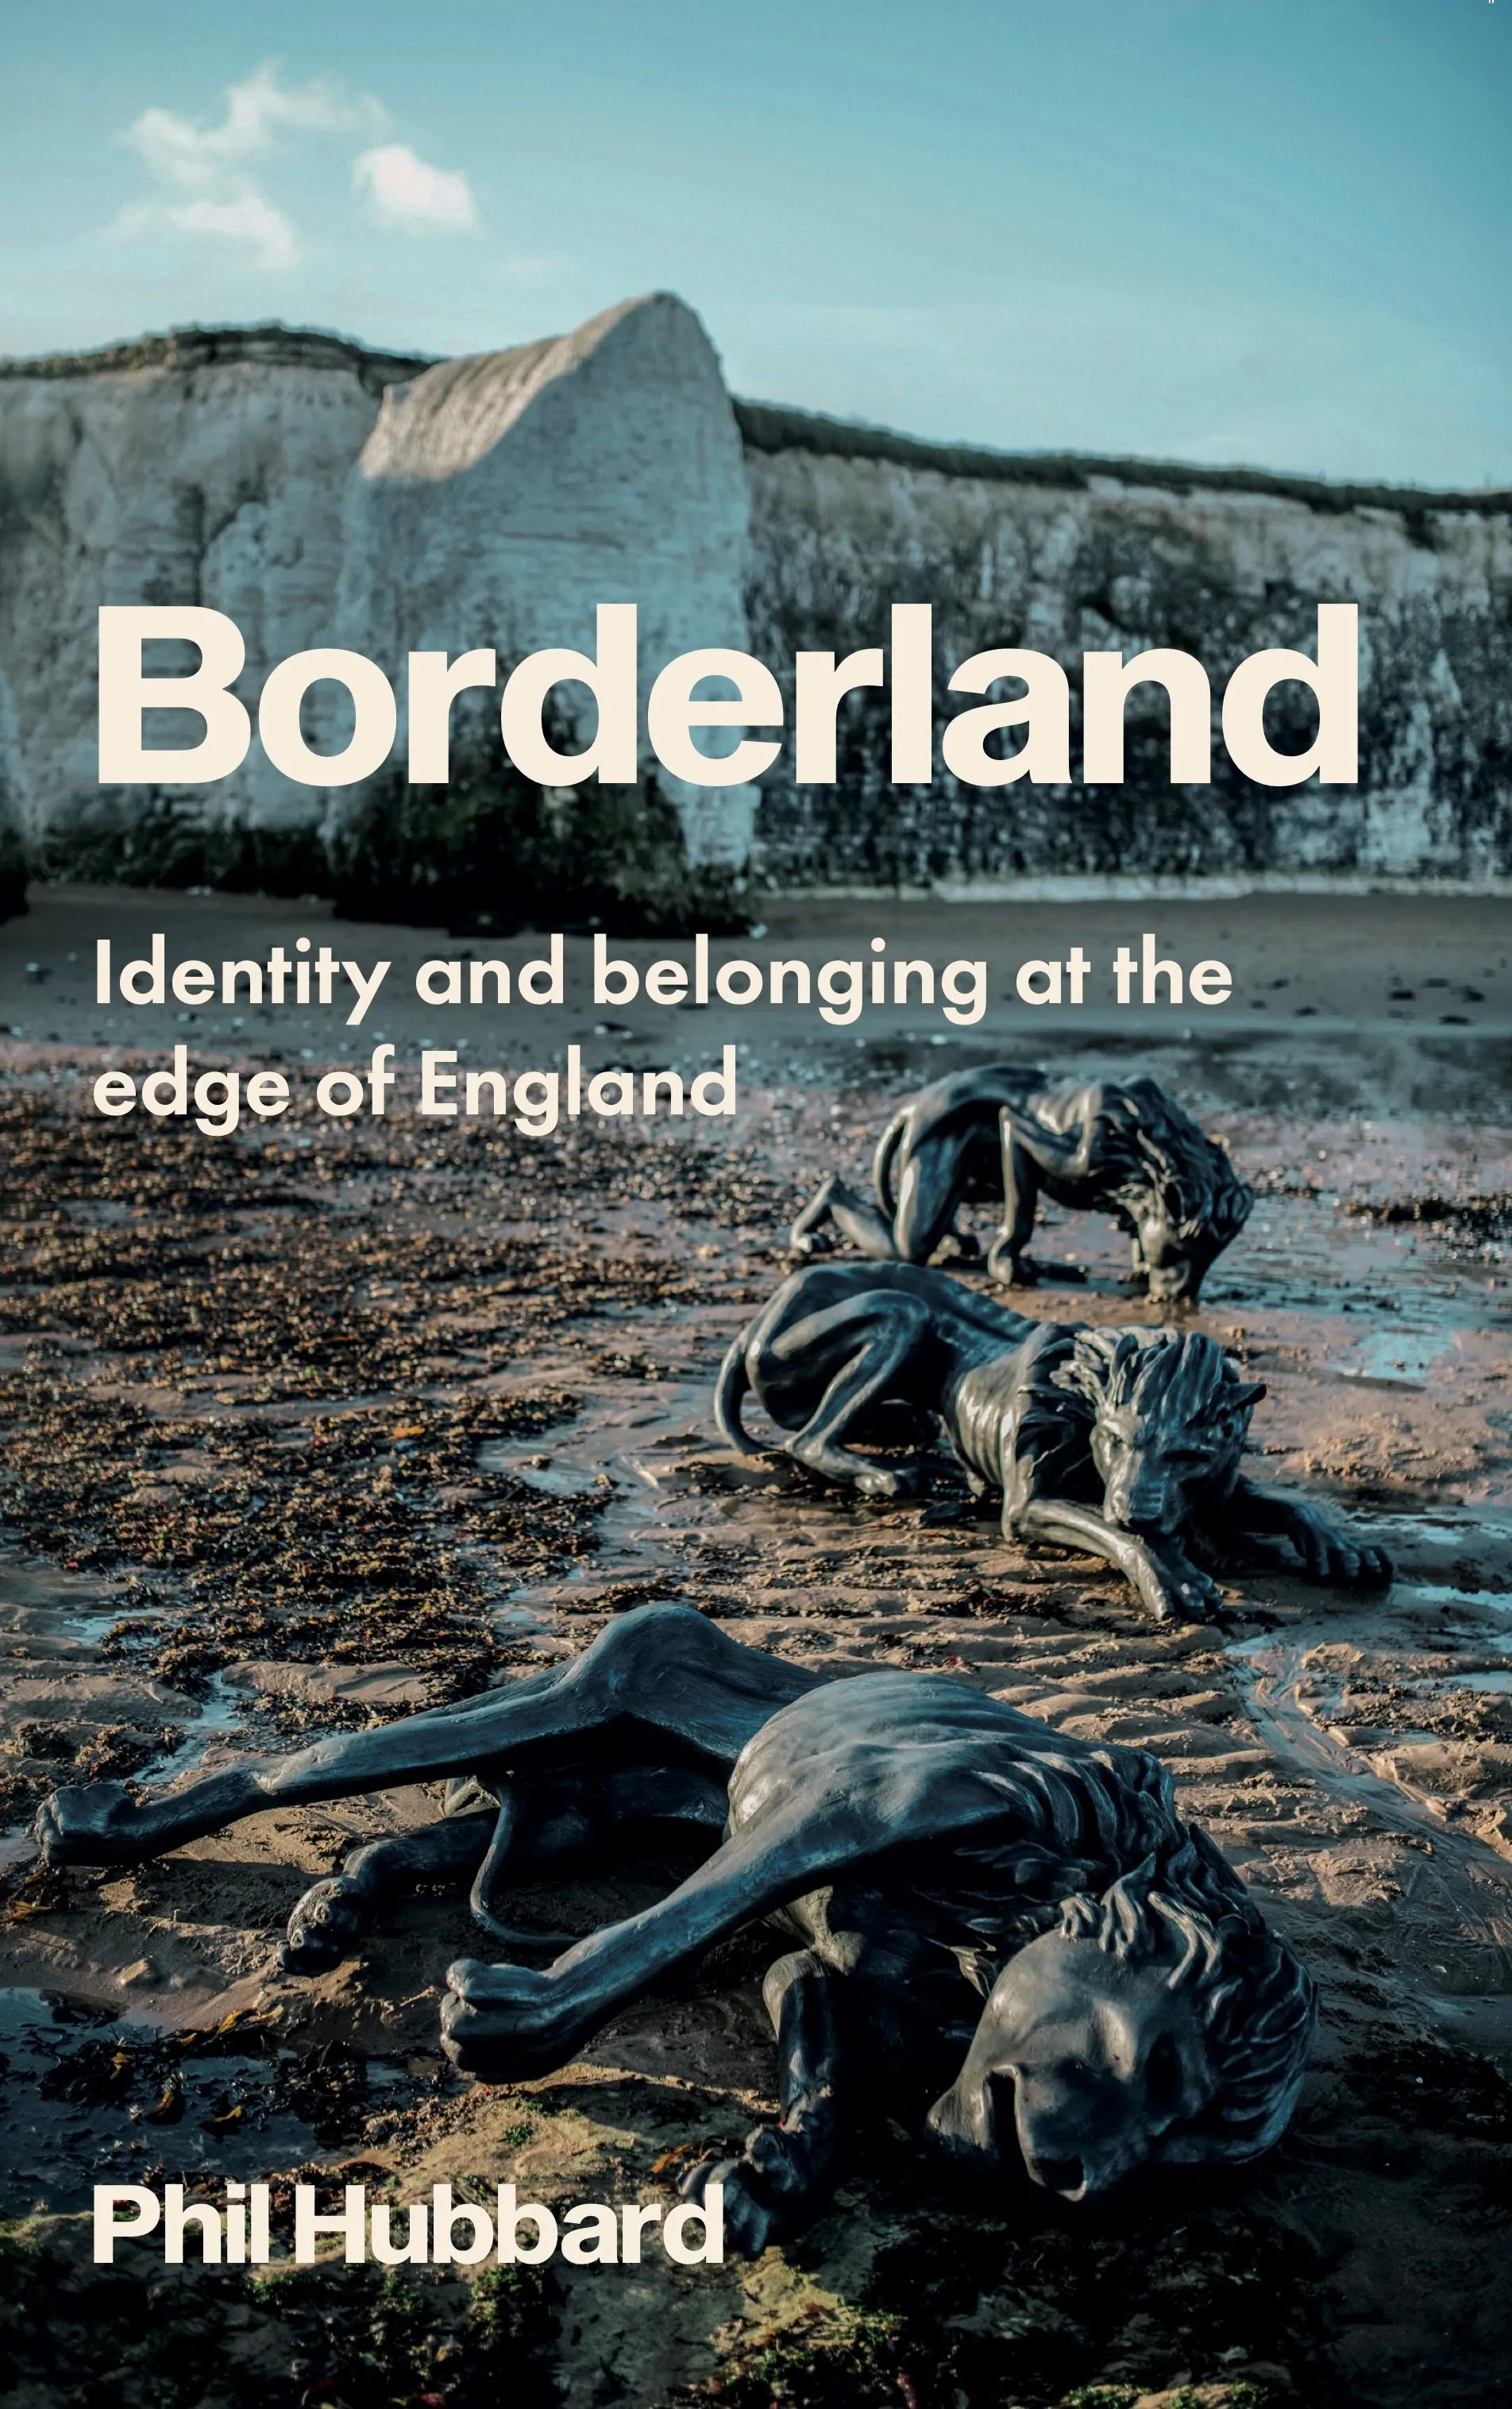 Borderland book cover, by Phil Hubbard